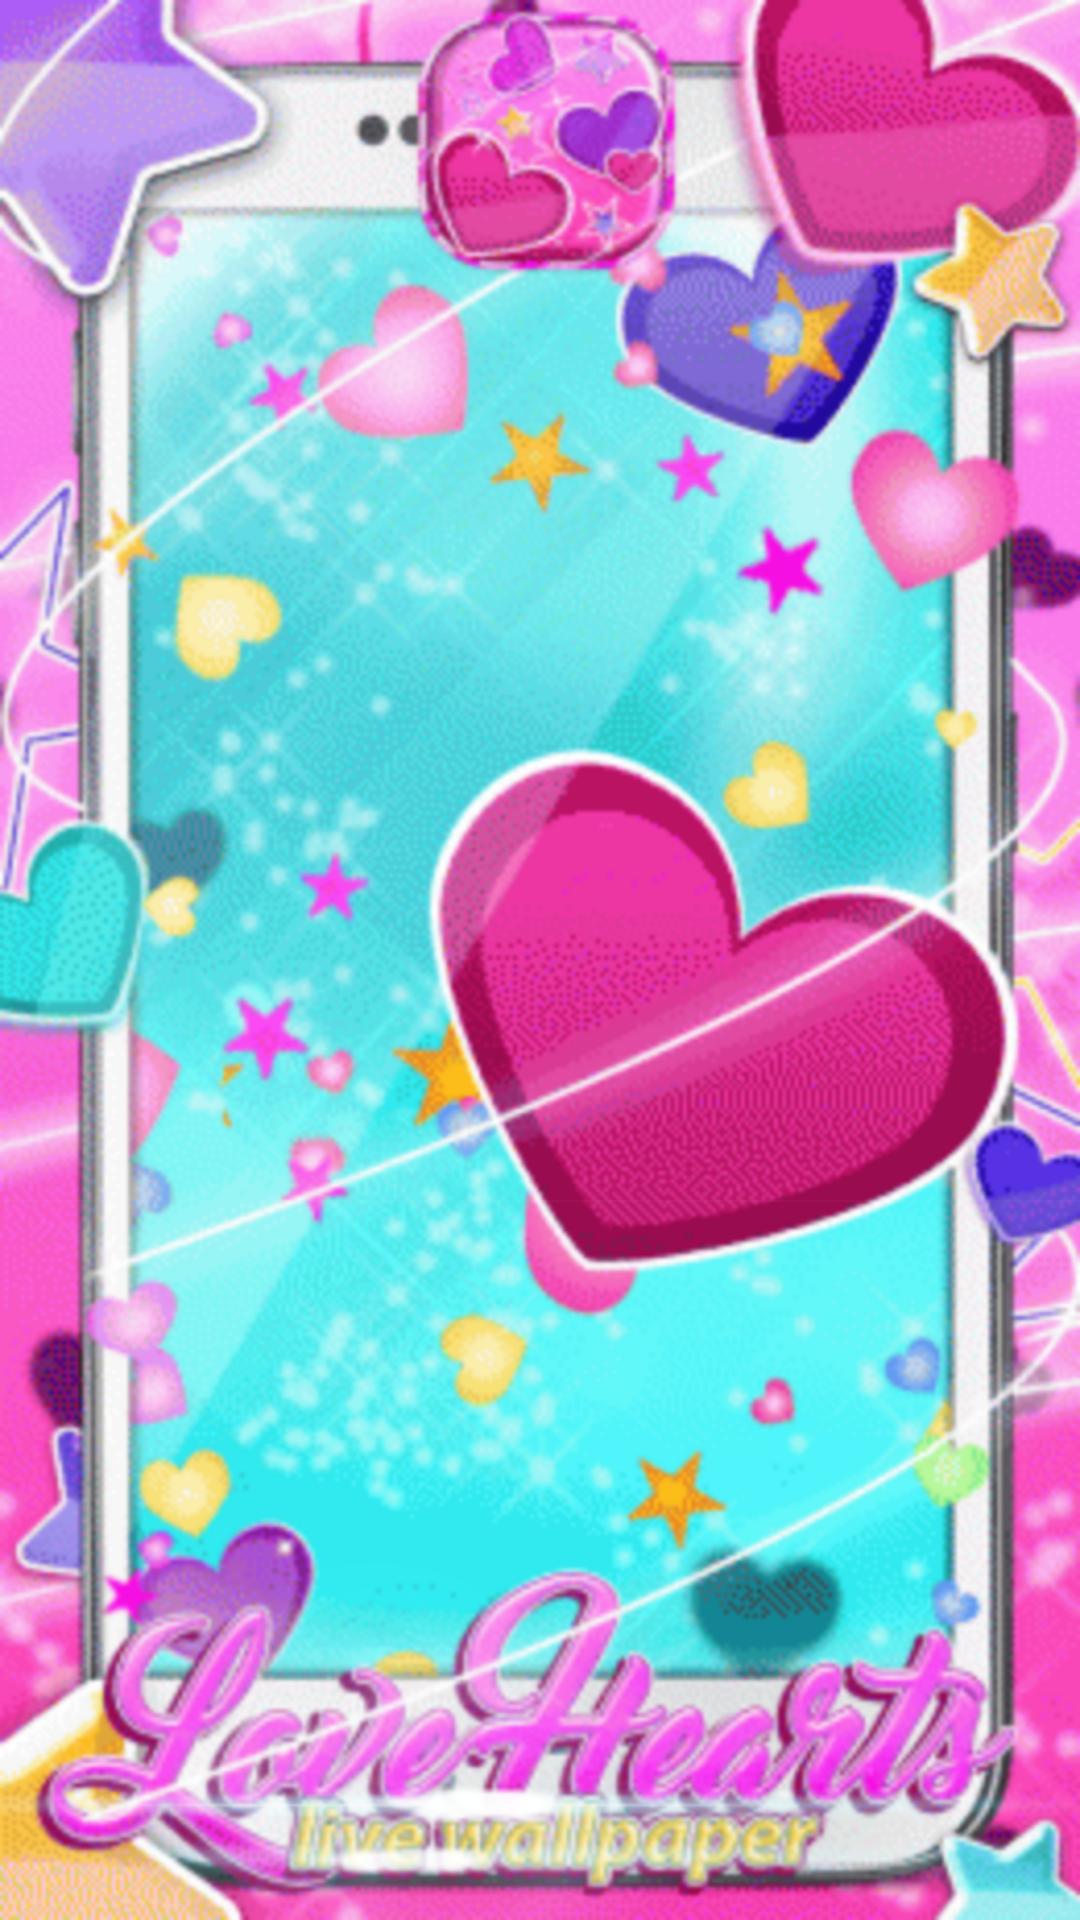 Girly Wallpaper for Android - APK Download